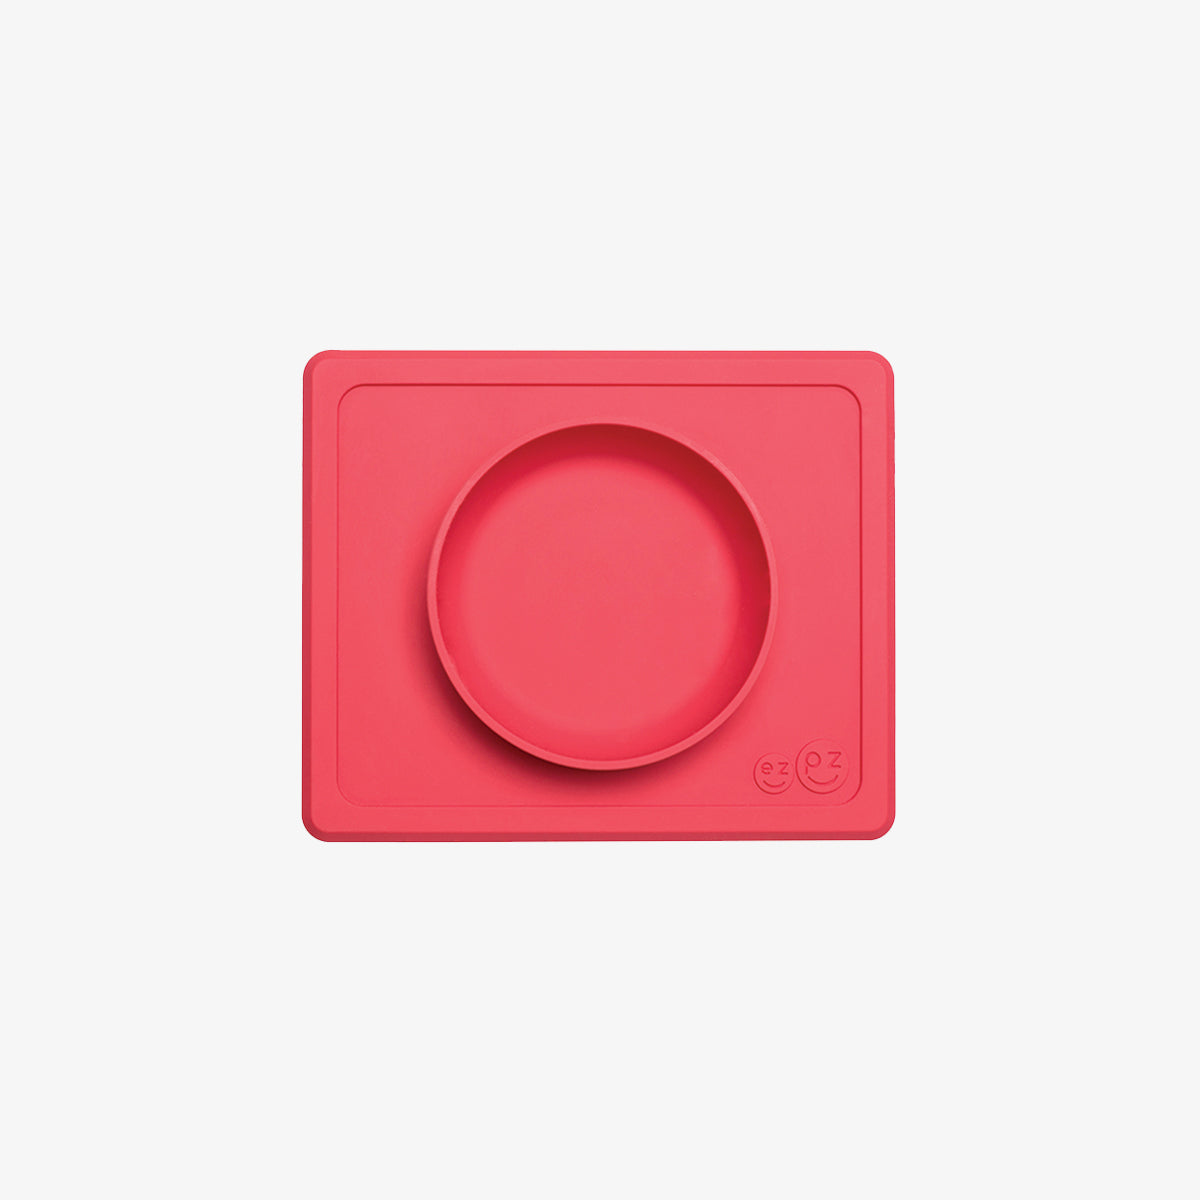 Mini Bowl in Coral by ezpz / The Original All-In-One Silicone Plates & Placemats that Stick to the Table